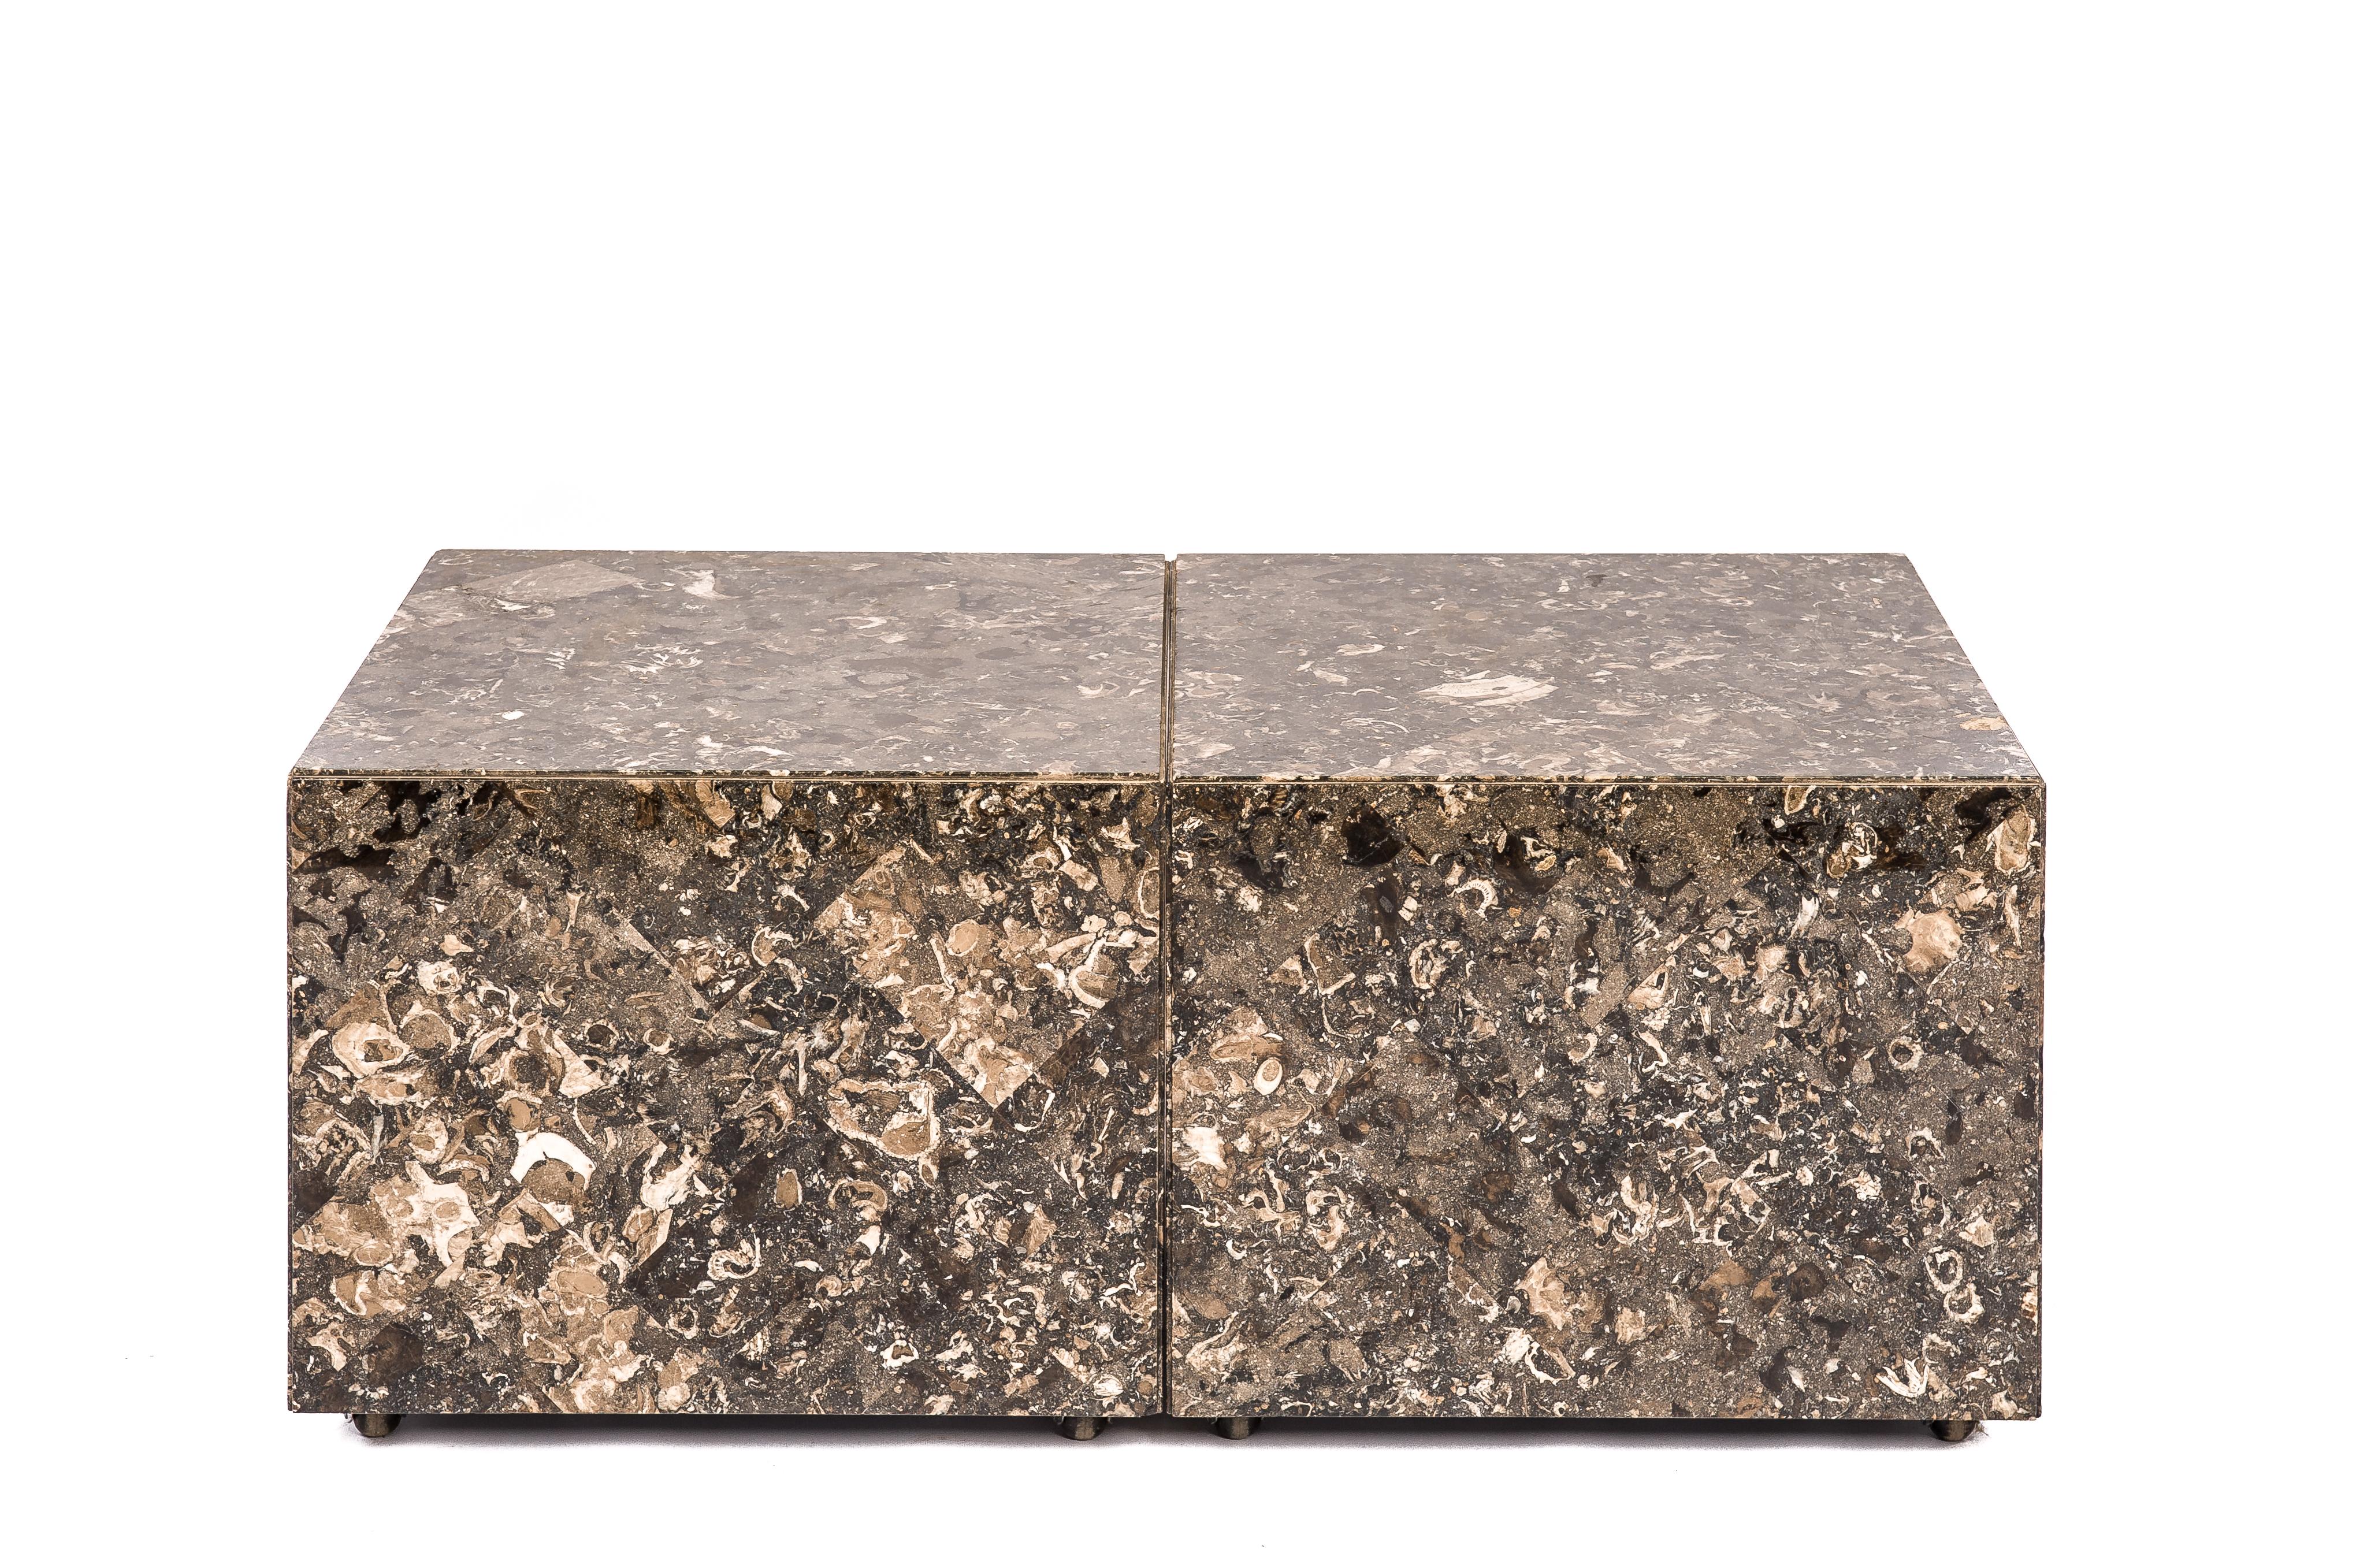 On offer here is a fantastic pair of grey-brown marble side tables or coffee tables made in France in the 1960s. The tables have a white Carara marble base and are covered with diagonally placed tiles in solid Fossil brown marble. This marble